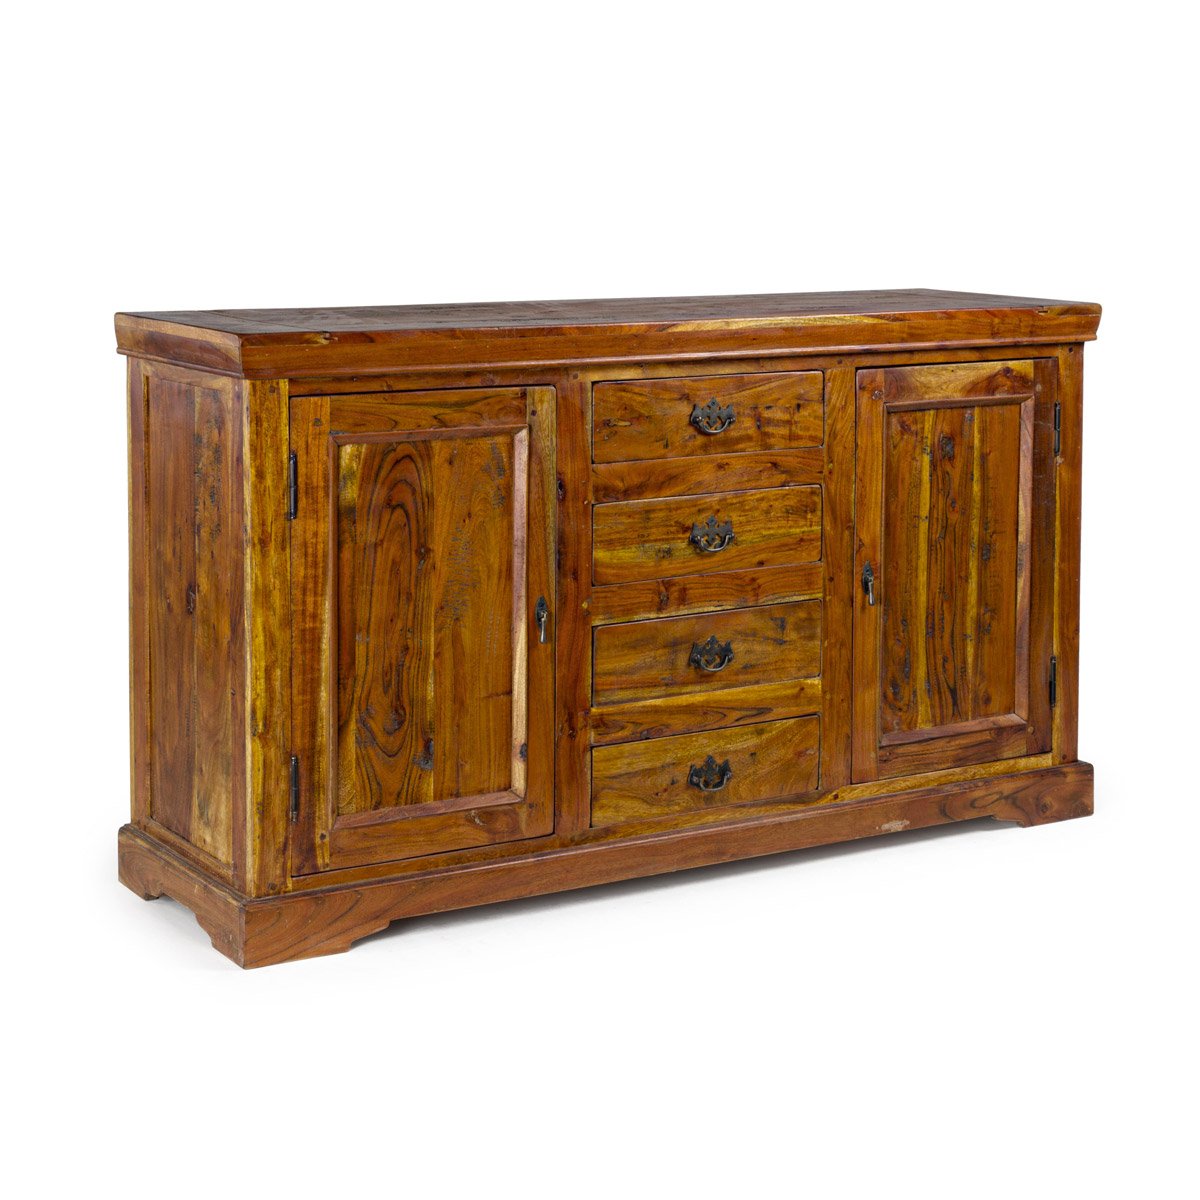 Credenza Chateaux 2A-4C